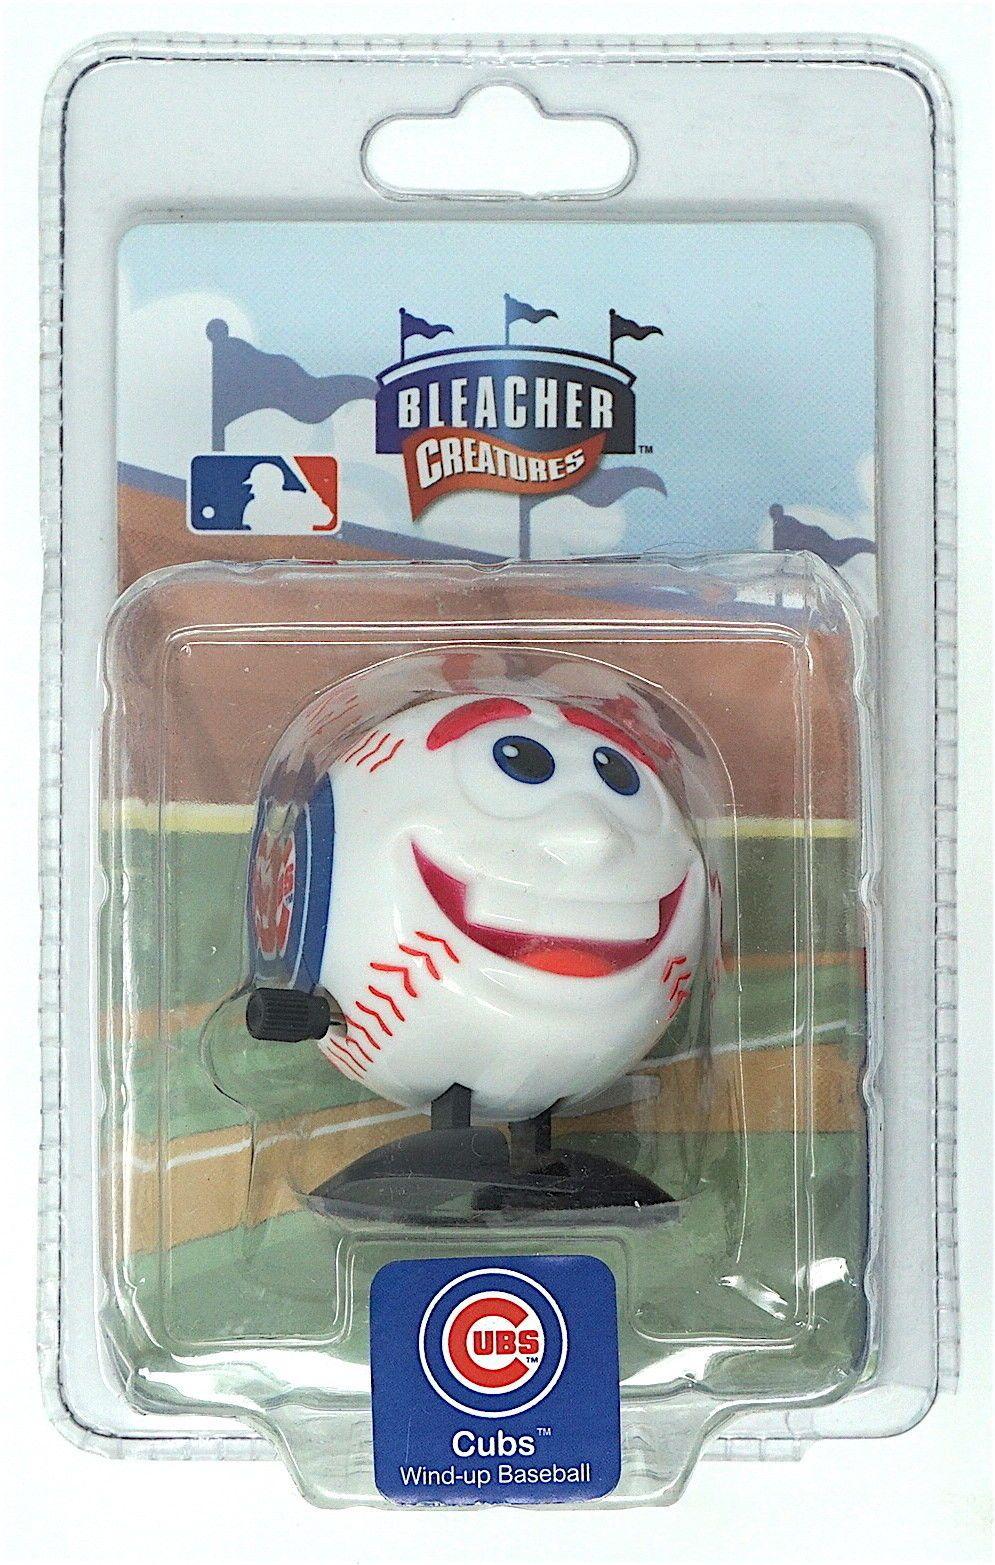 Creatures of the Wind Logo - Bleacher Creatures MLB Chicago Cubs League Wind Up Baseball Toy